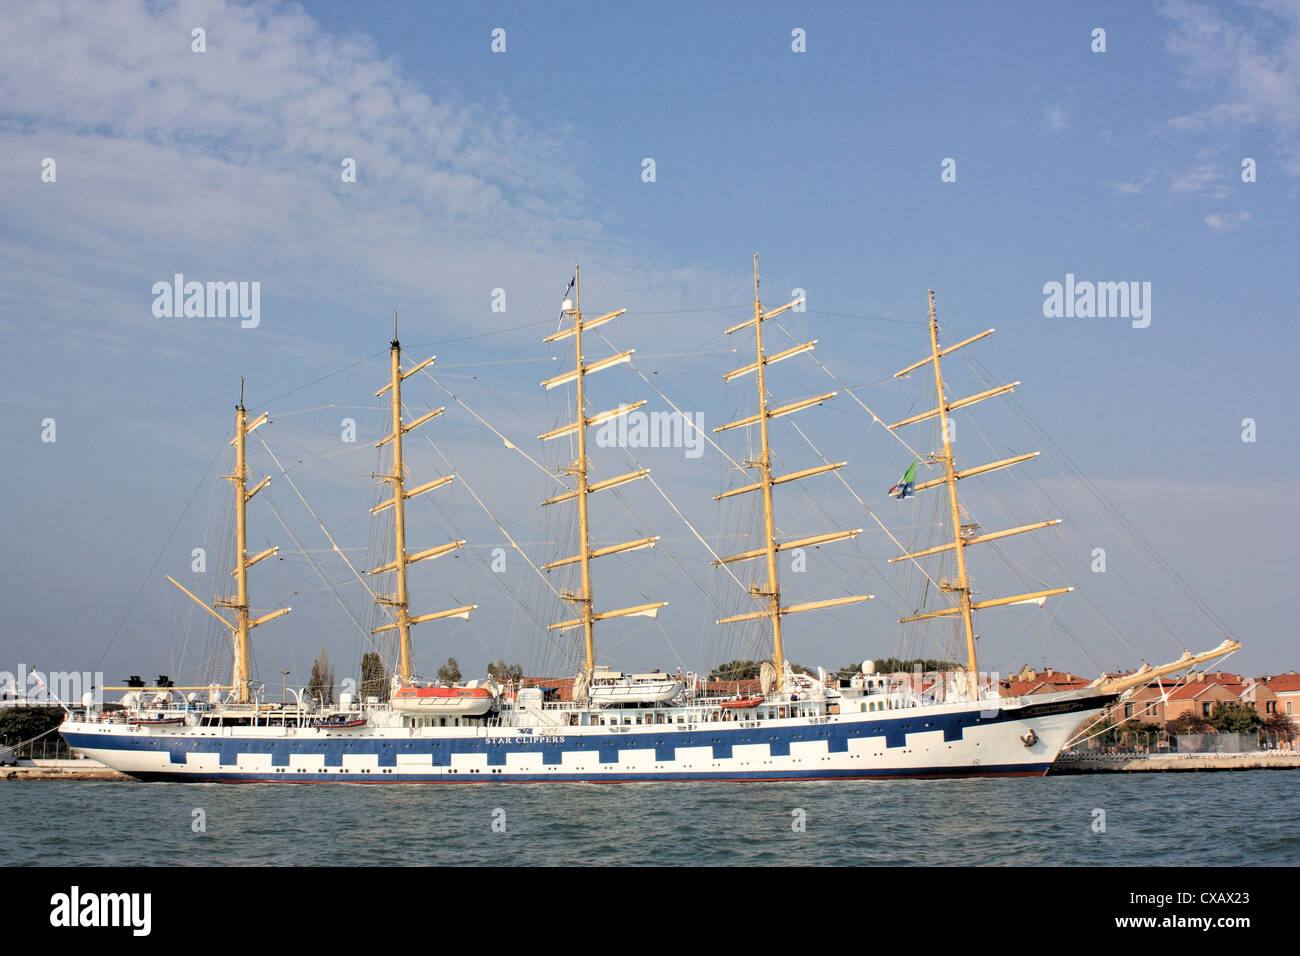 Tall ship Royal Clipper (Star Clippers Ltd.), IMO 8712178 Stock Photo